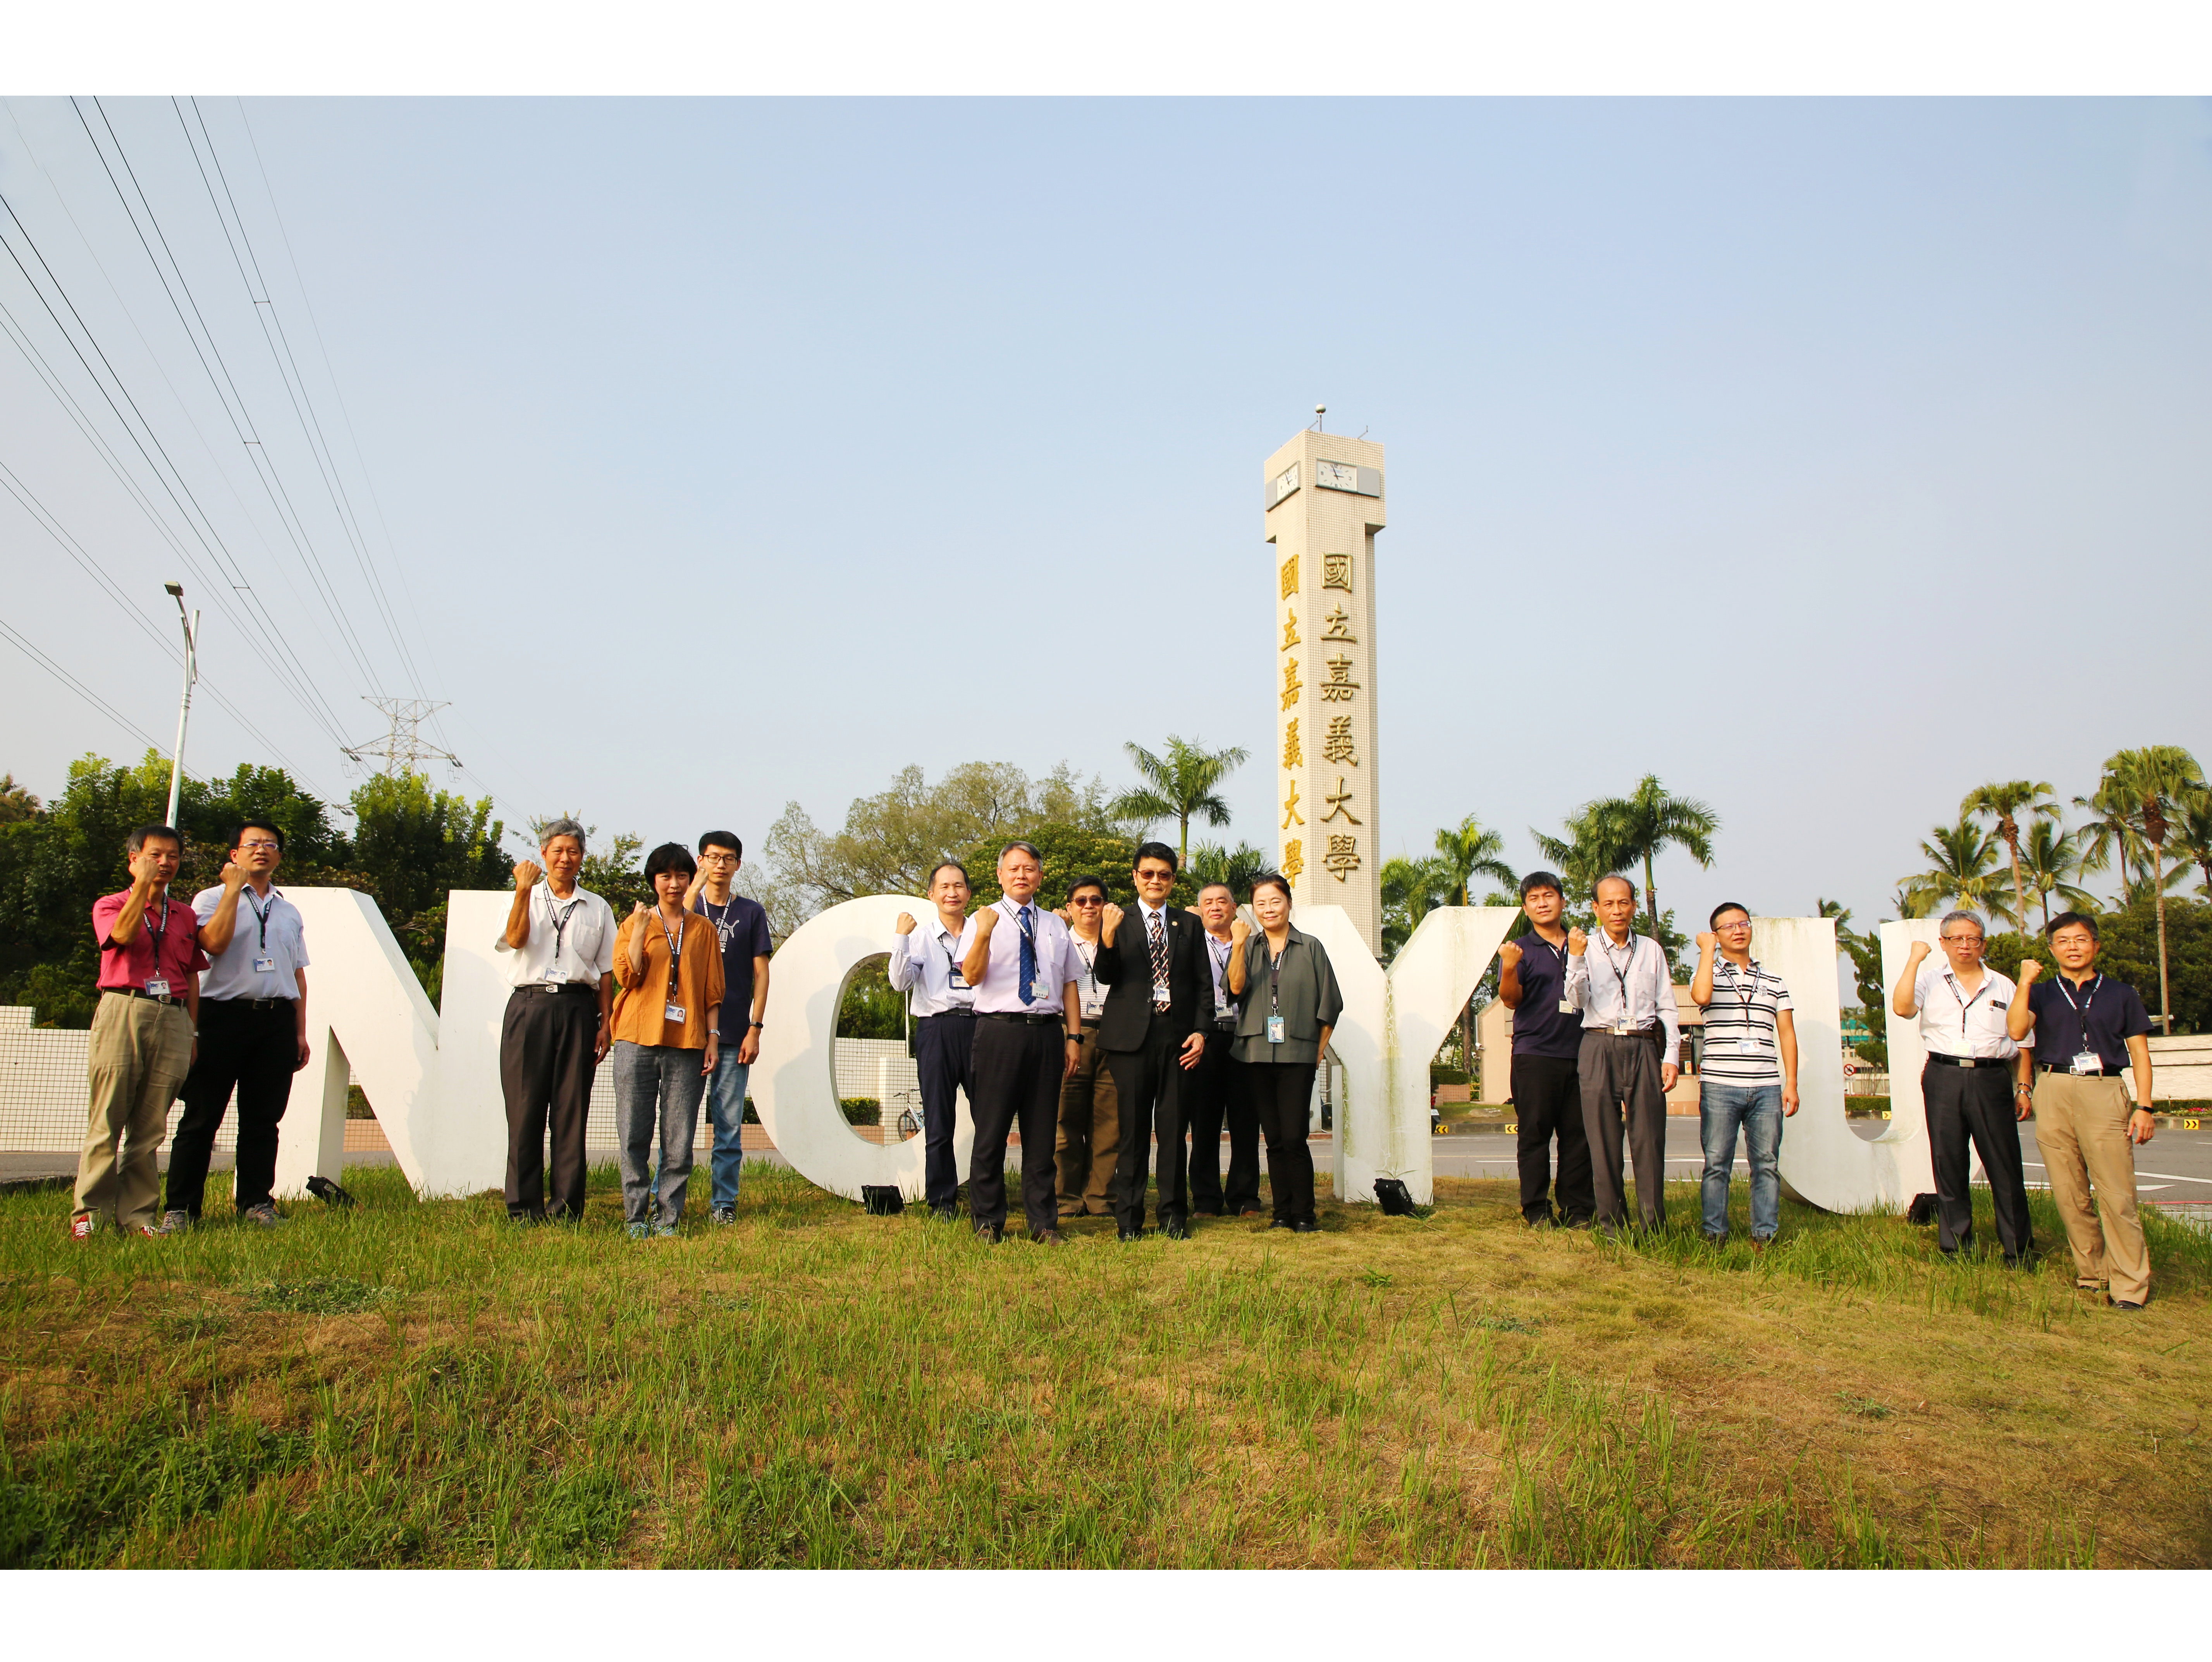 Led by NCYU President Han Chien Lin, the Energy-Saving Initiative Committee pledged to achieve net zero and carbon reduction, making the university sustainable.